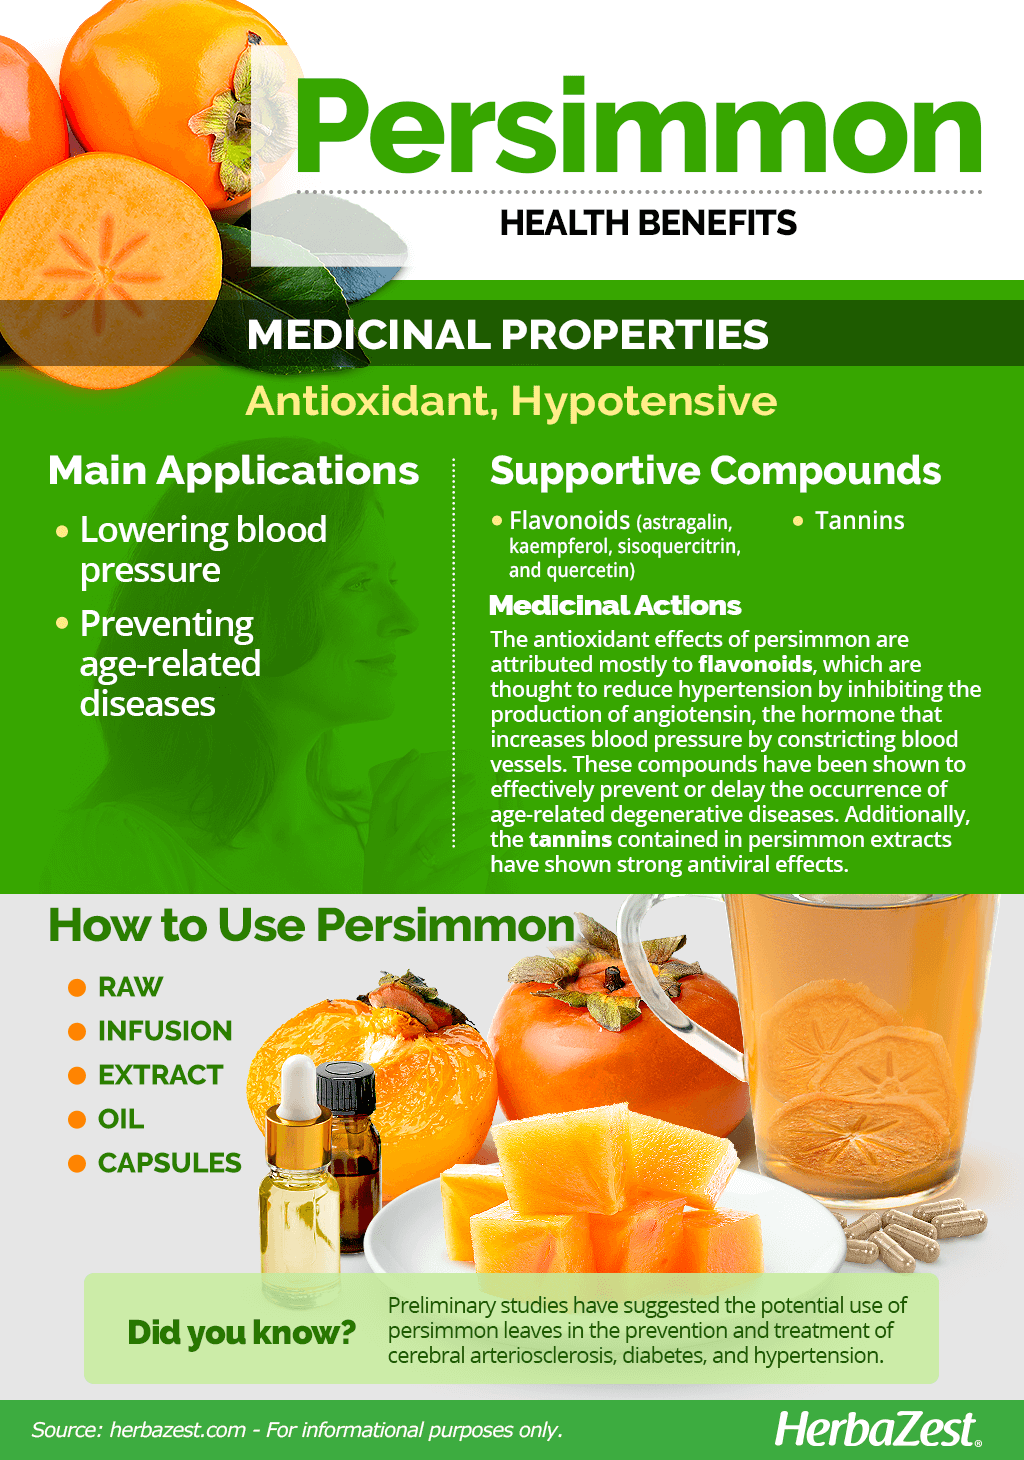 All About Persimmon